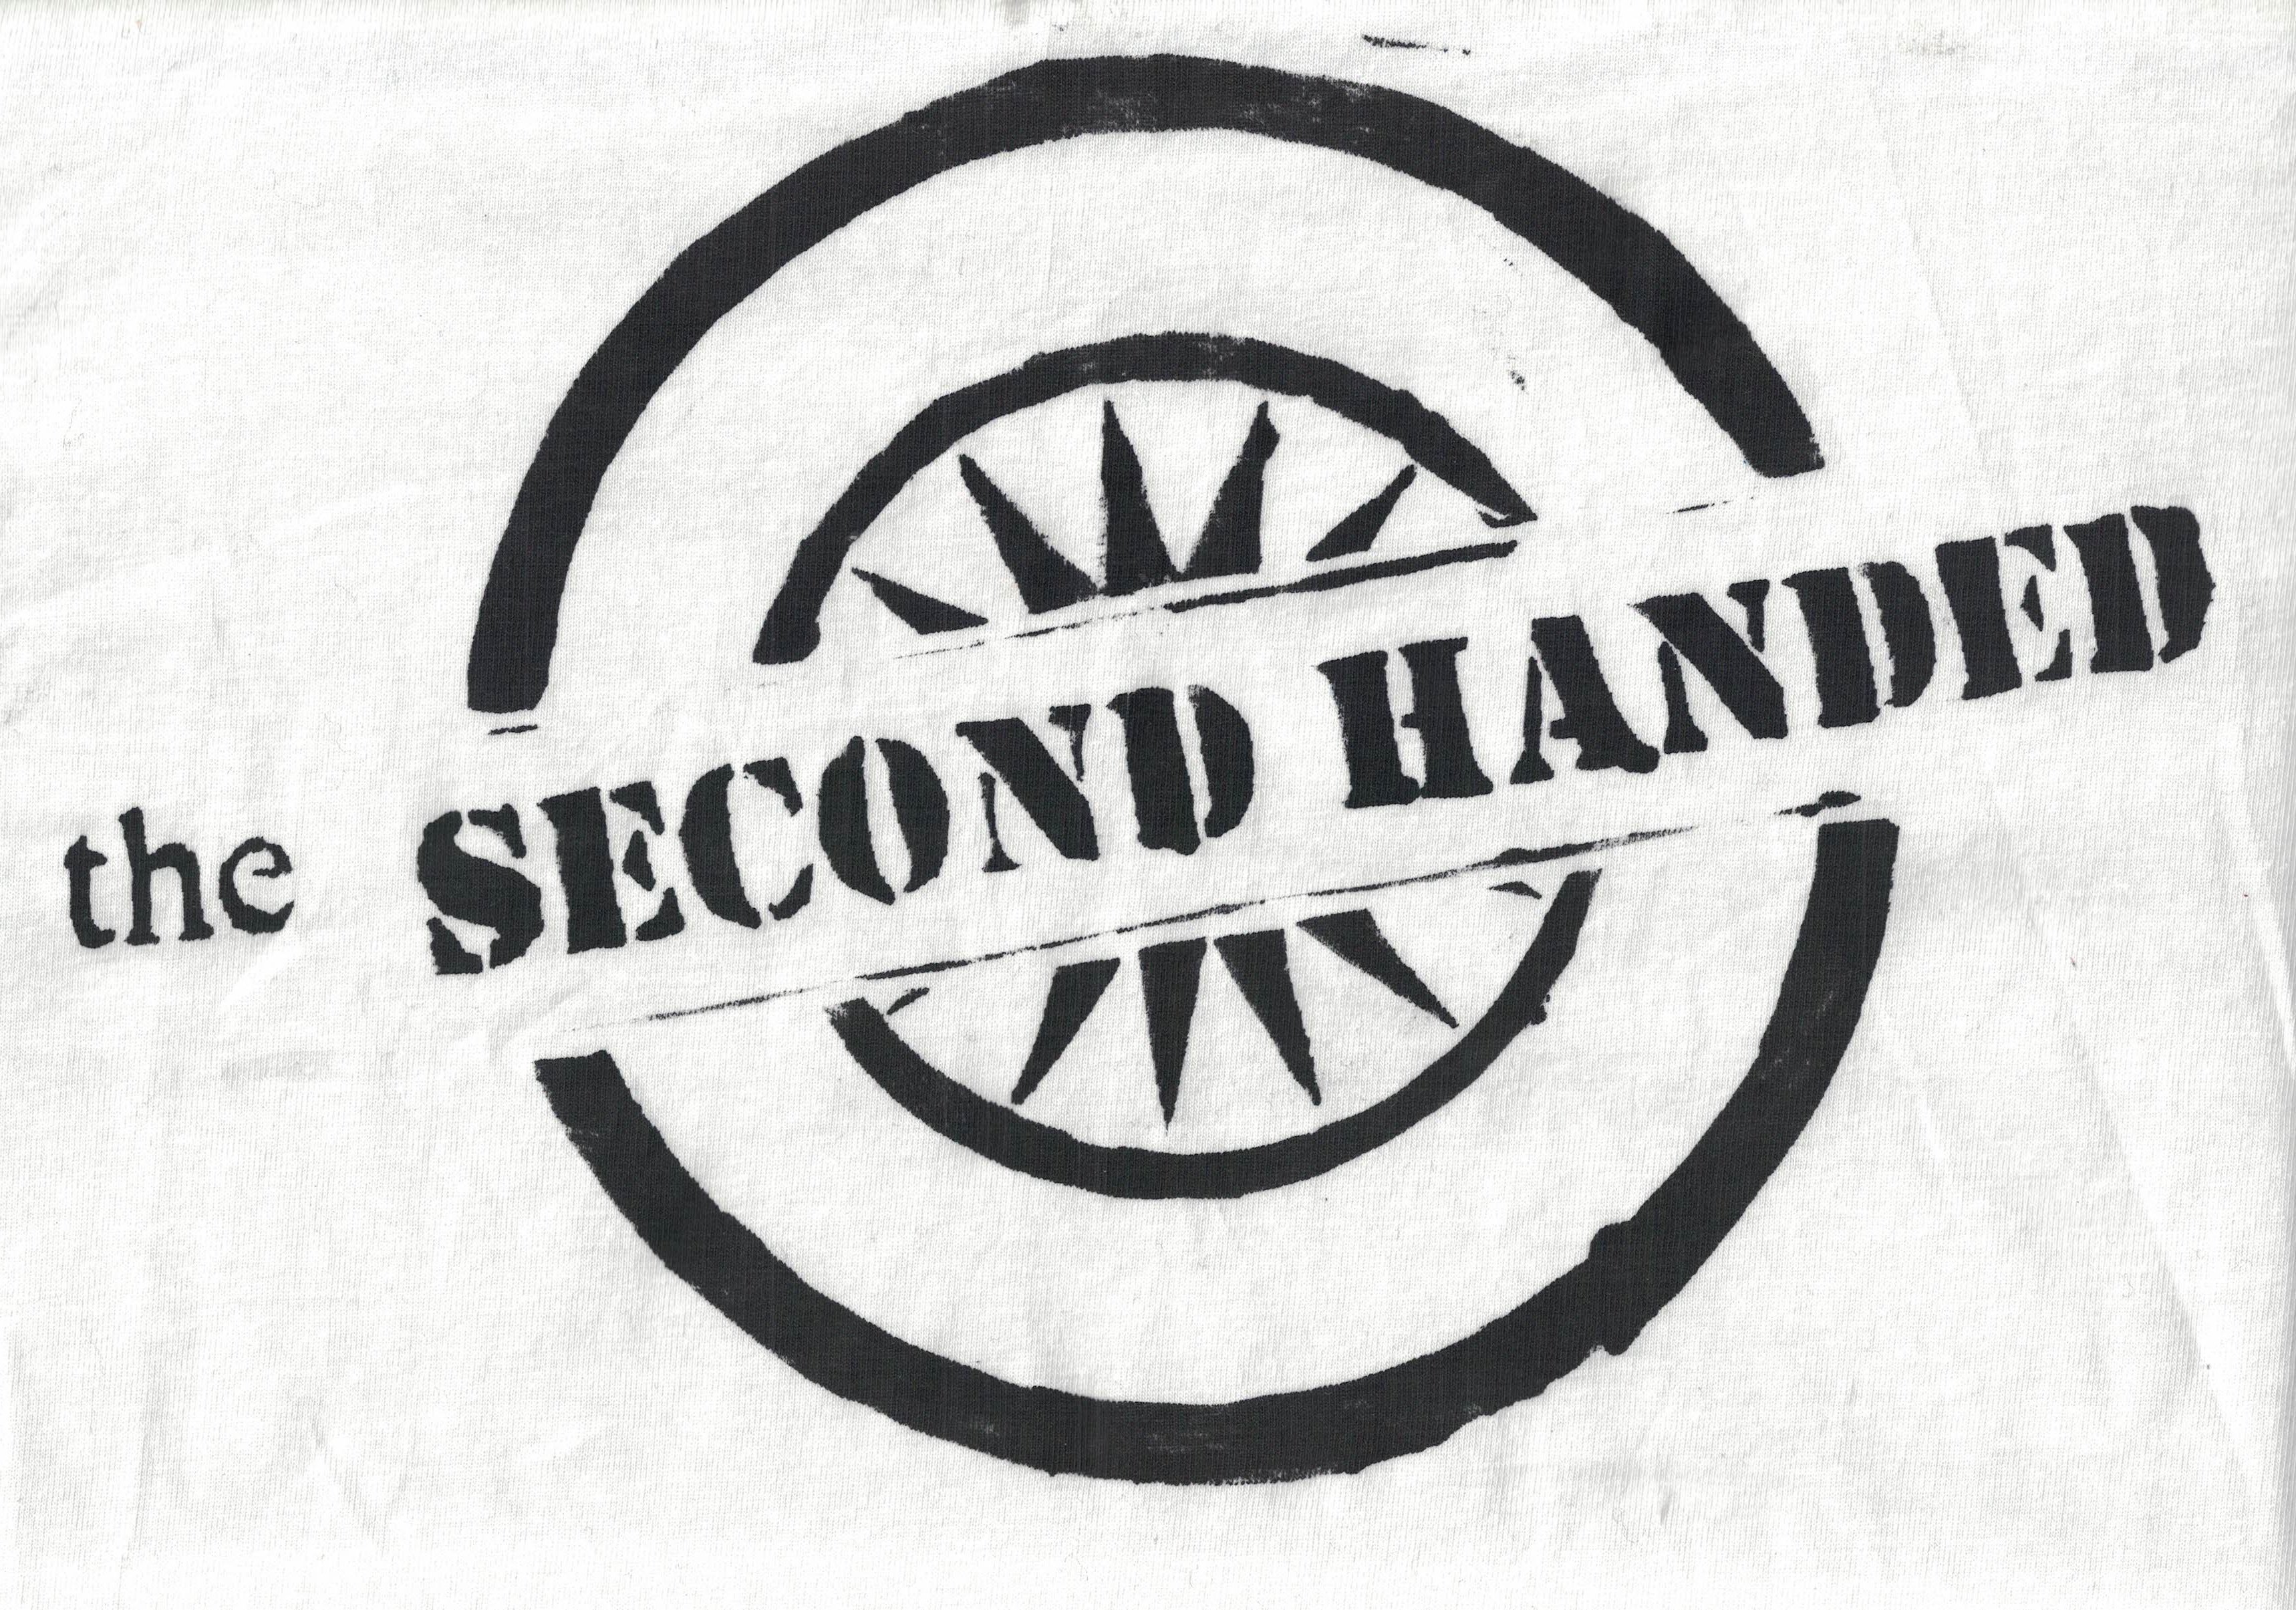 The Second Handed